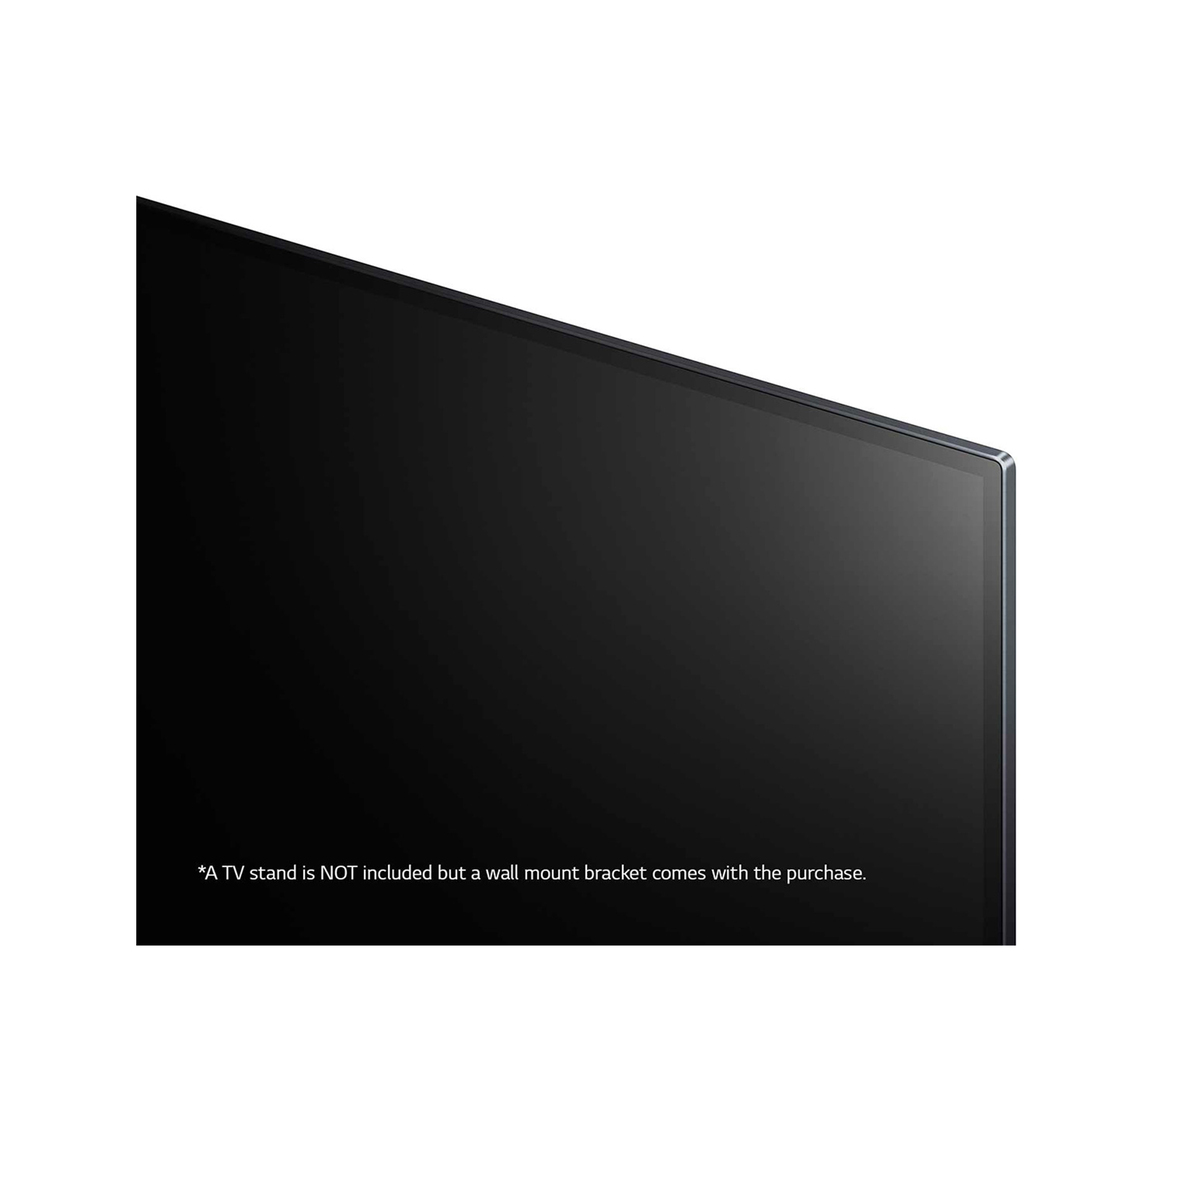 LG OLED TV 77 Inch GX Series, Gallery Design 4K Cinema HDR WebOS Smart ThinQ AI Pixel Dimming